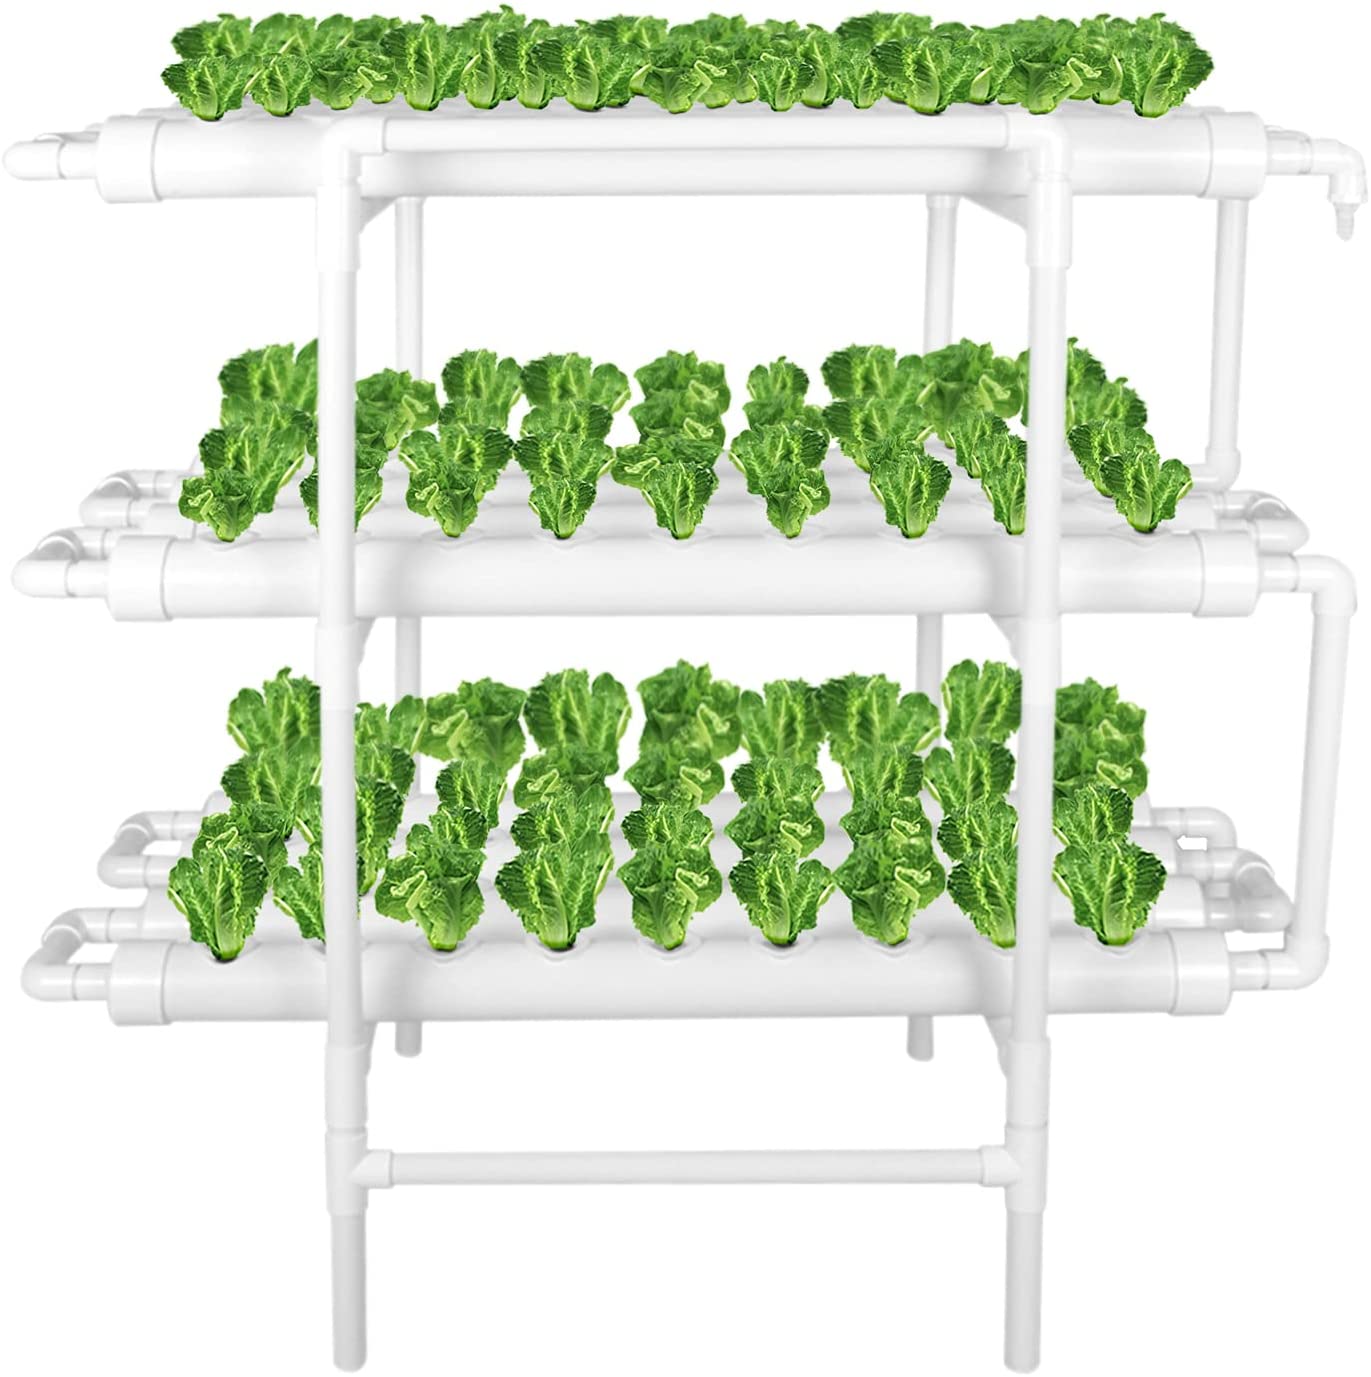 LAPOND 3-Layer Hydroponic Grow System